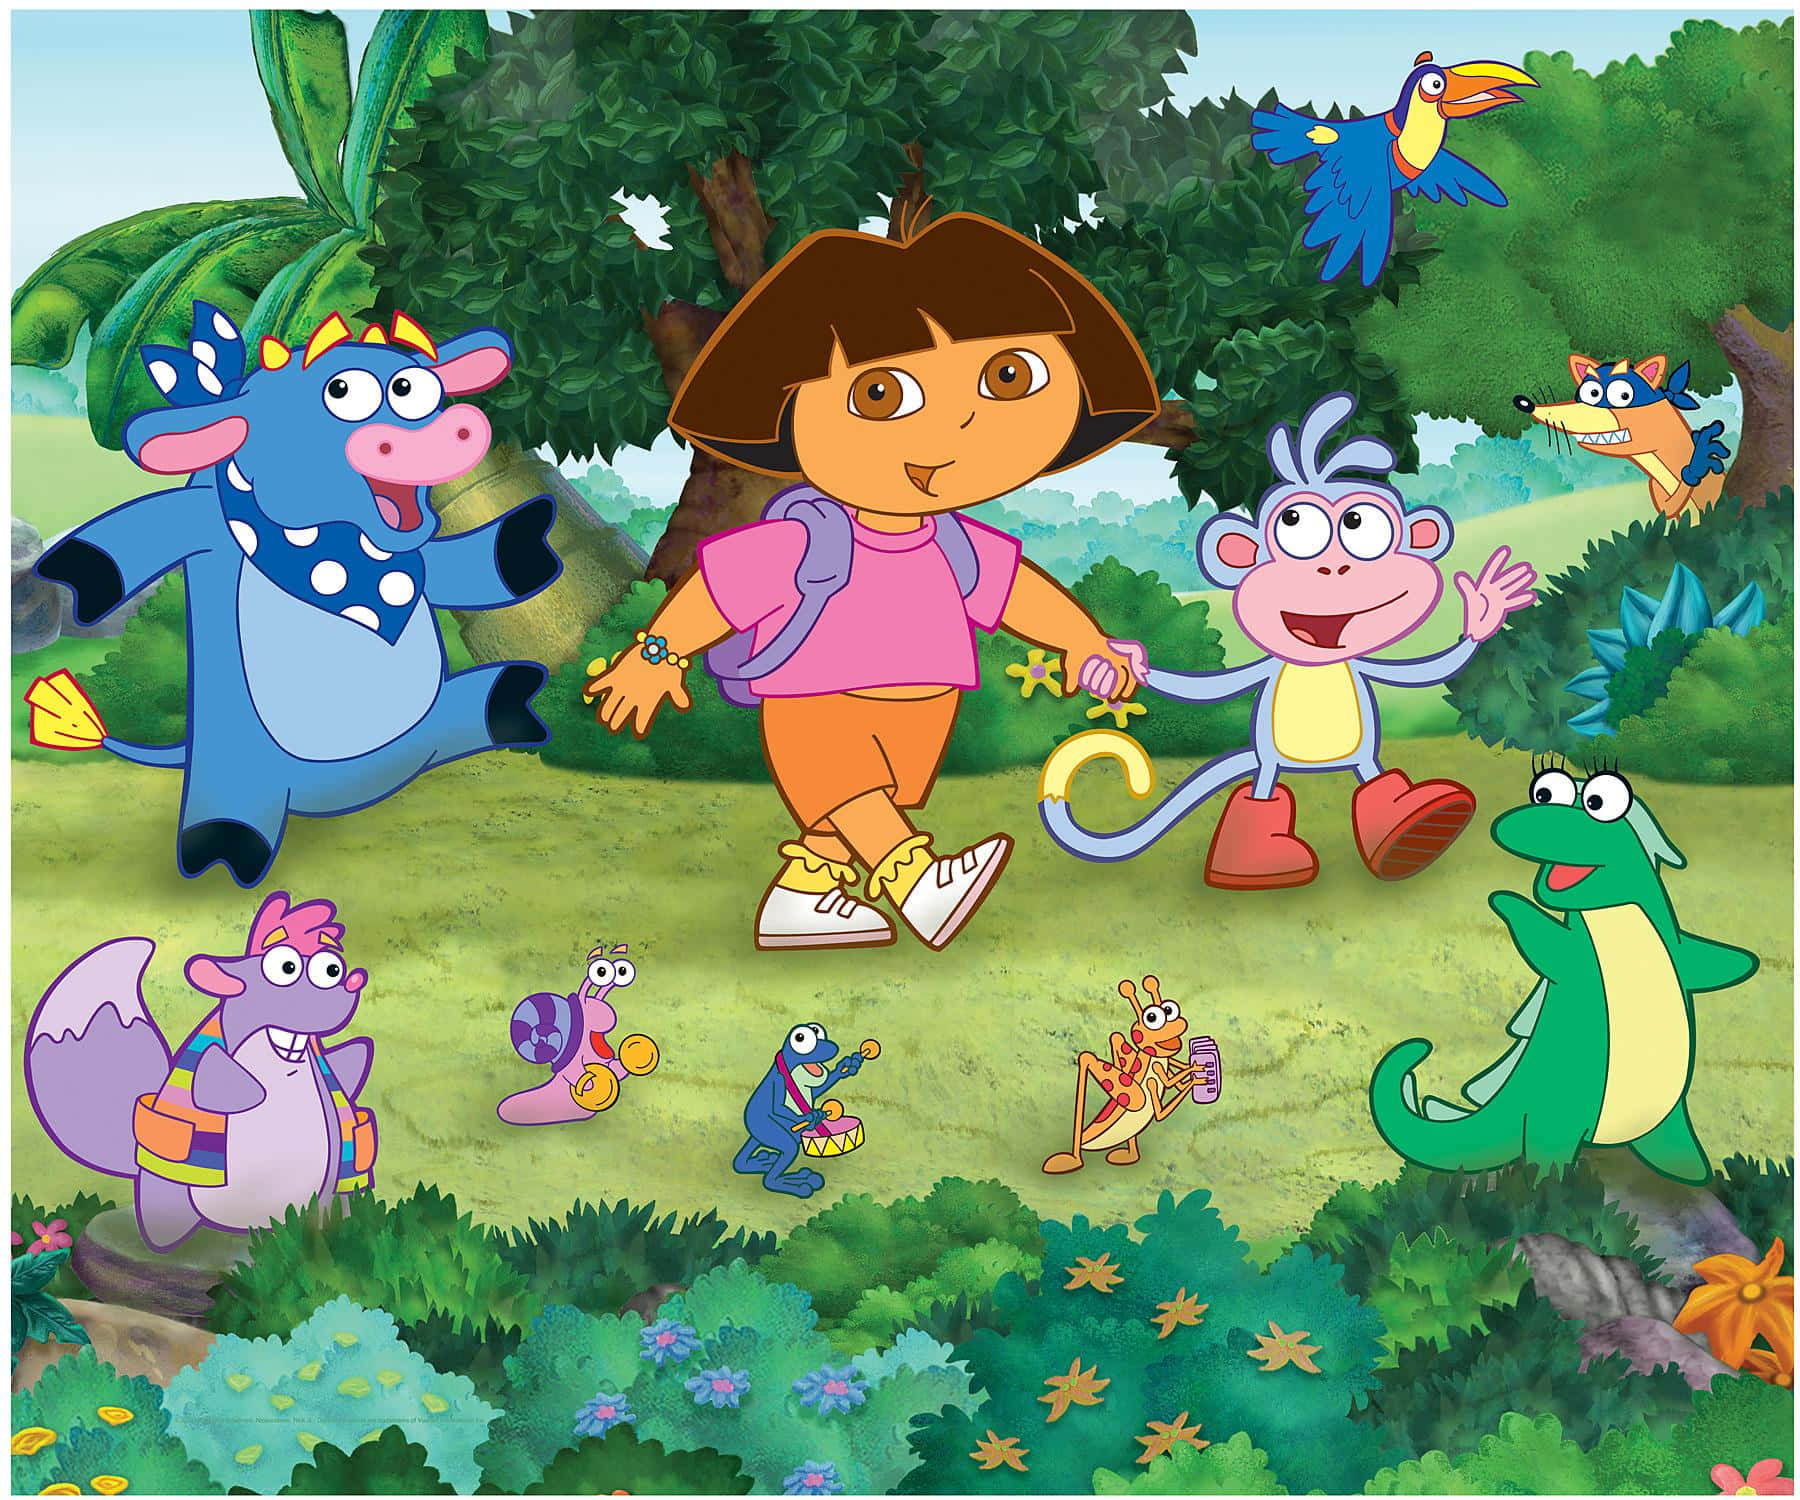 Join in's on the fun with Dora The Explorer!